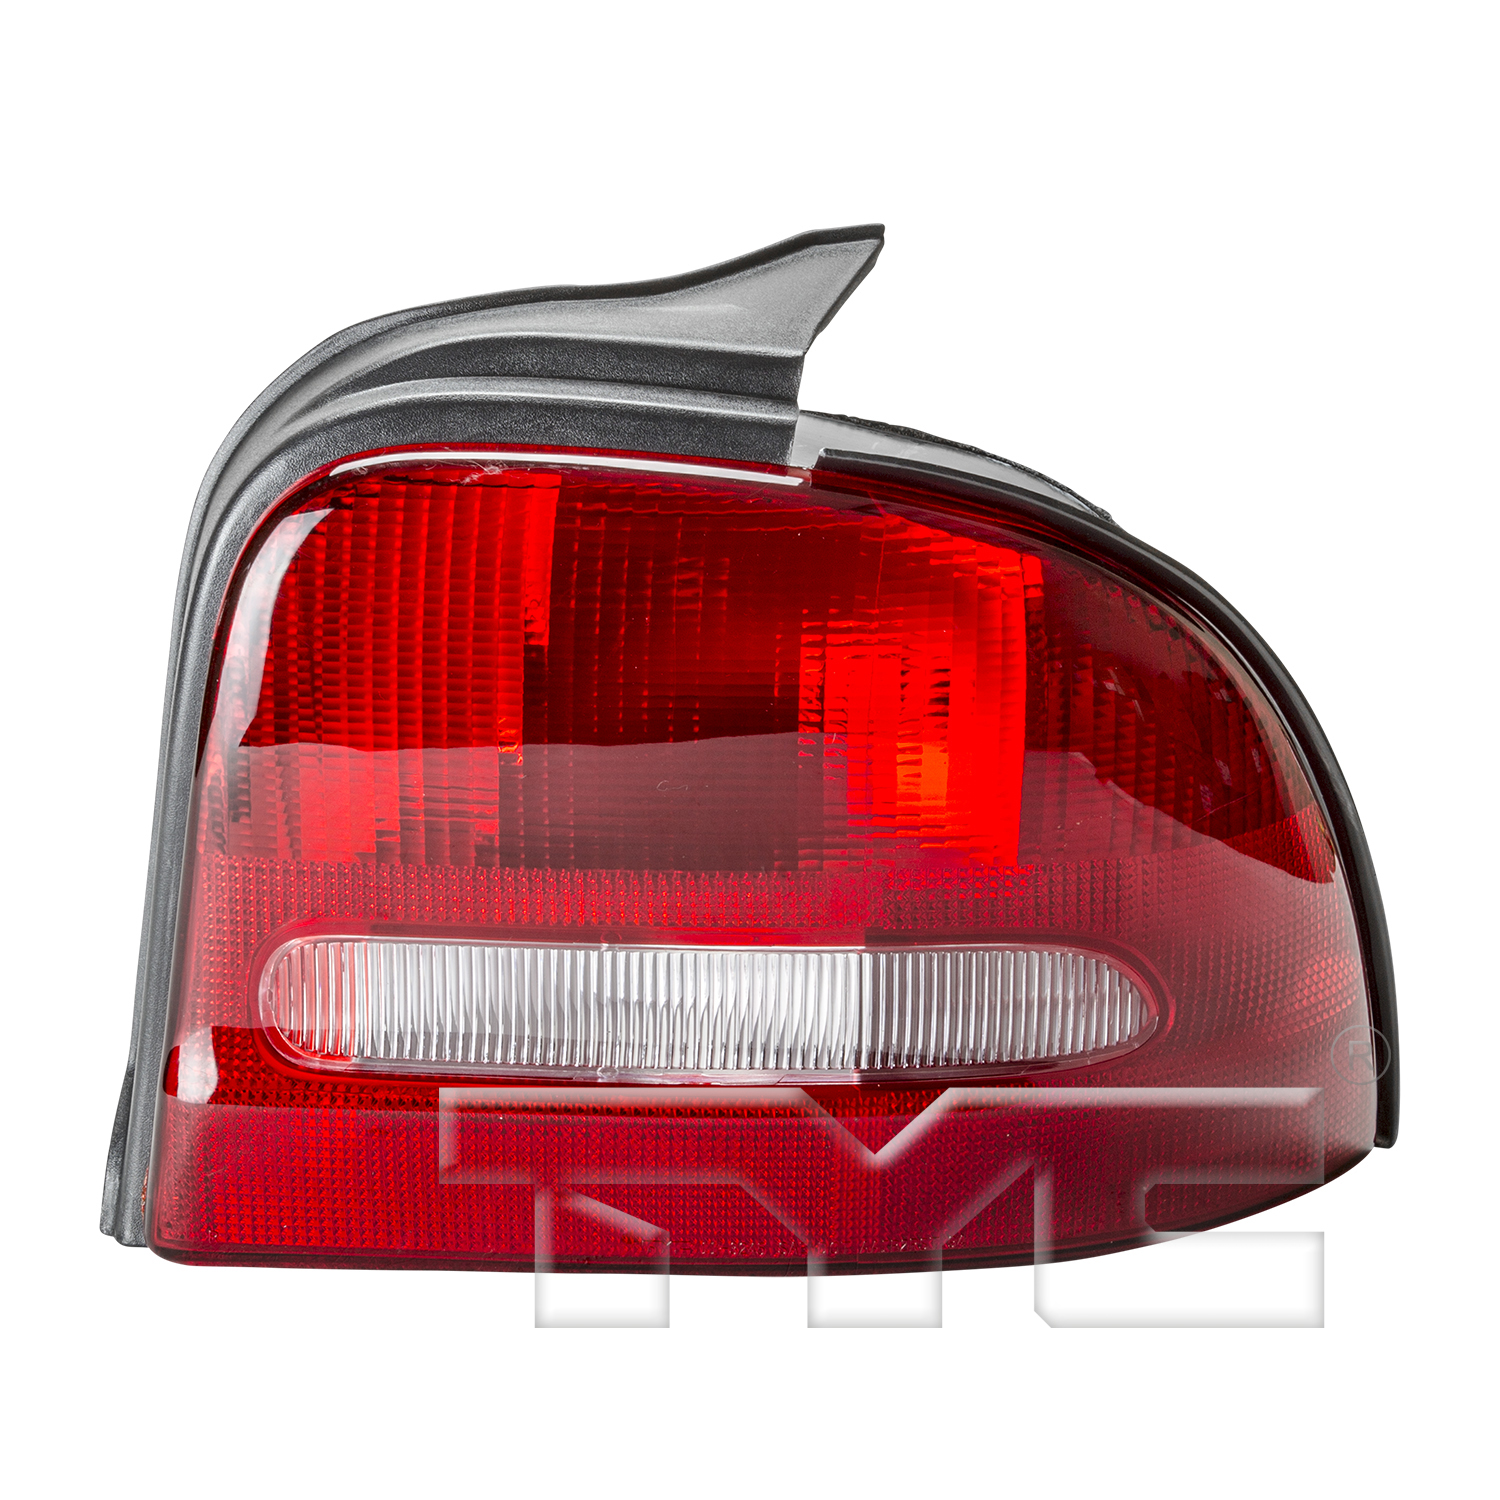 Aftermarket TAILLIGHTS for DODGE - NEON, NEON,95-99,RT Taillamp assy